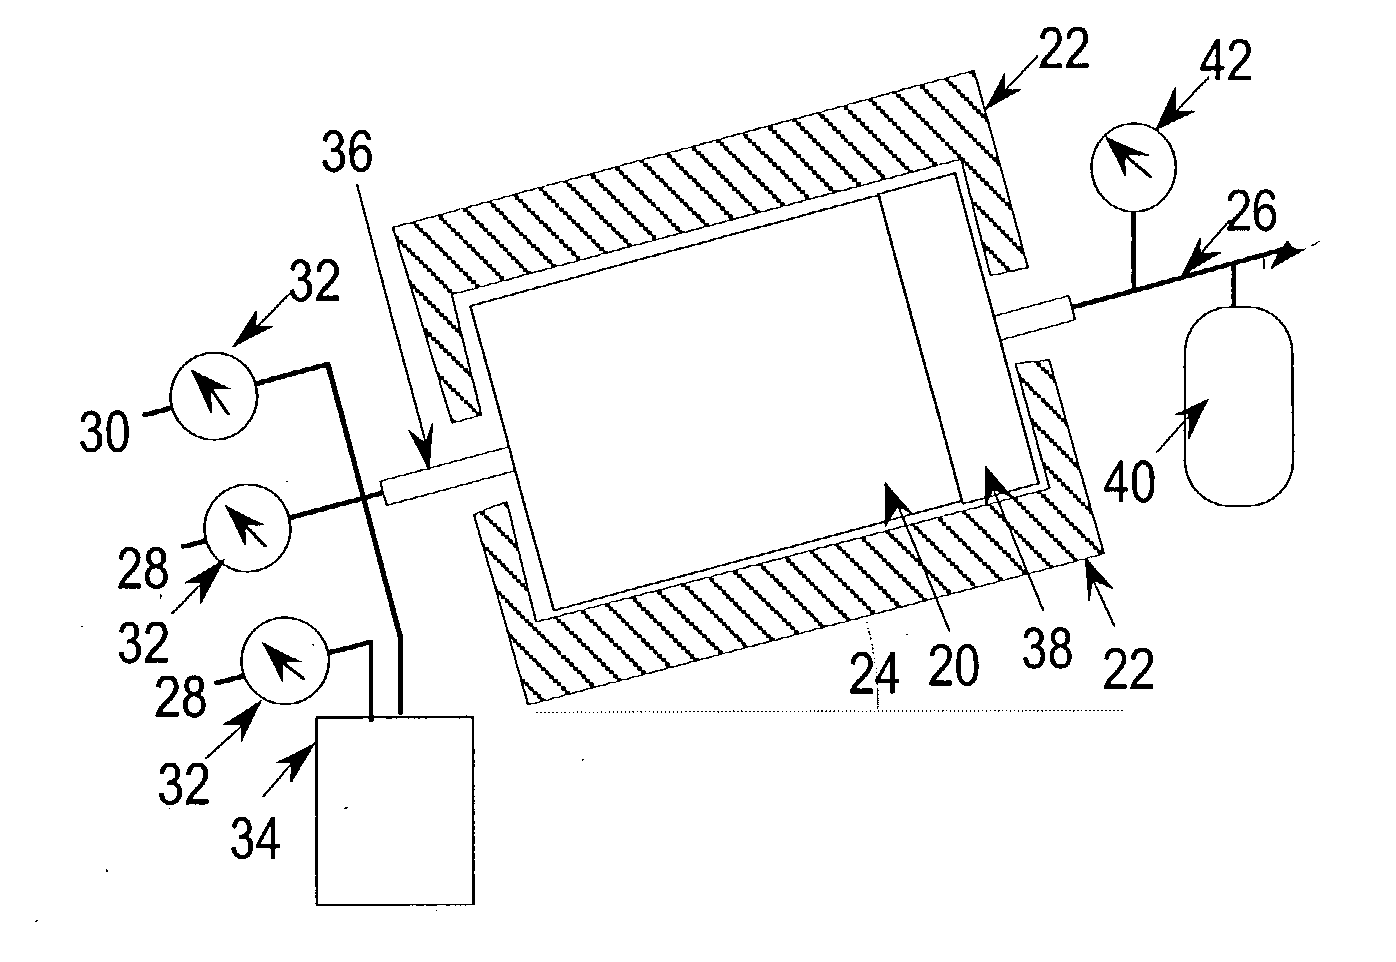 Apparatus and method of treating fine powders